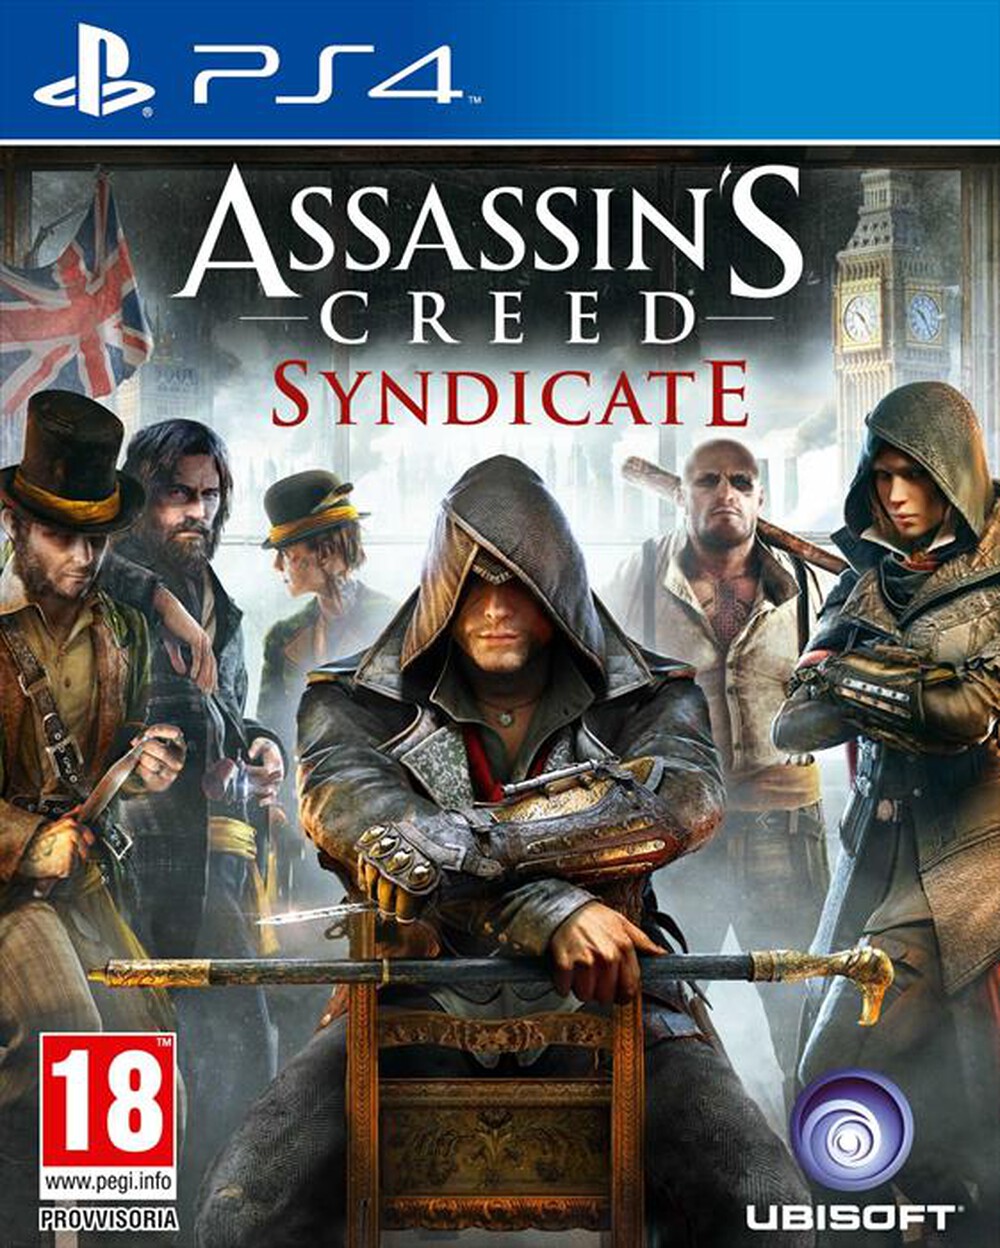 "UBISOFT - Assassin’s Creed Syndicate Ps4 - "